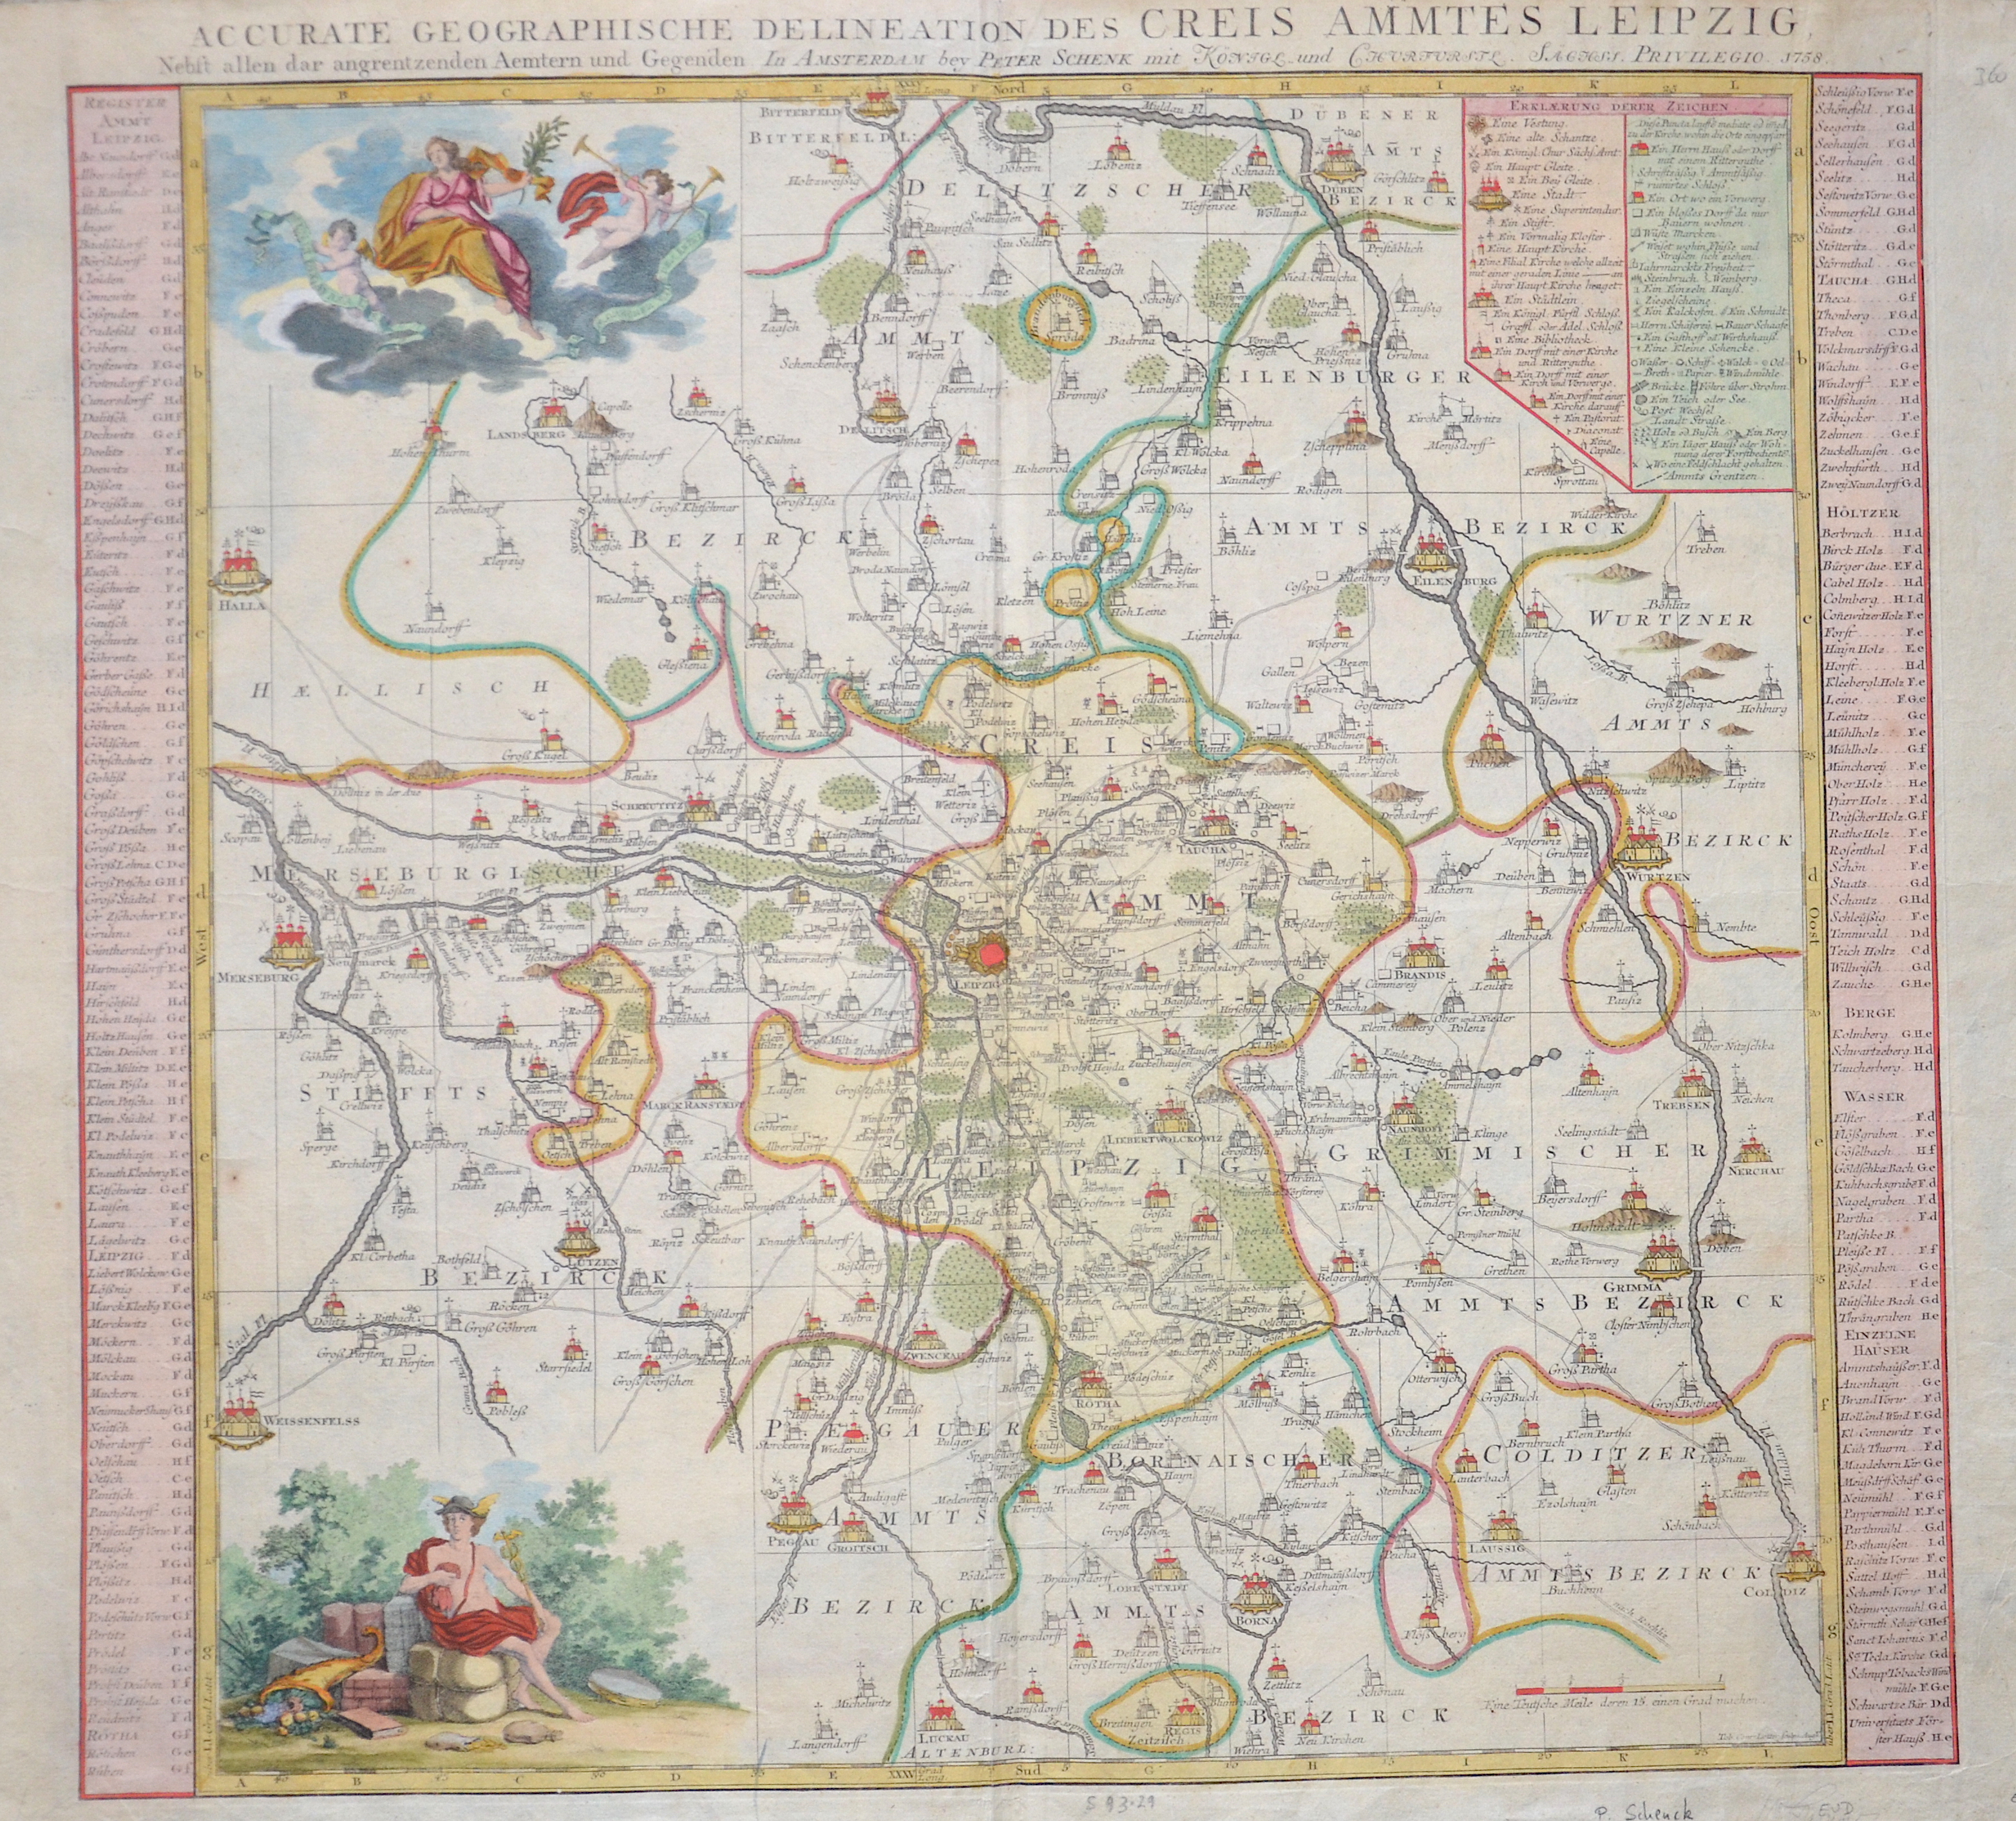 Lotter Tobias Conrad Accurate geographische delineation des Creis Ammtes Leipzig.